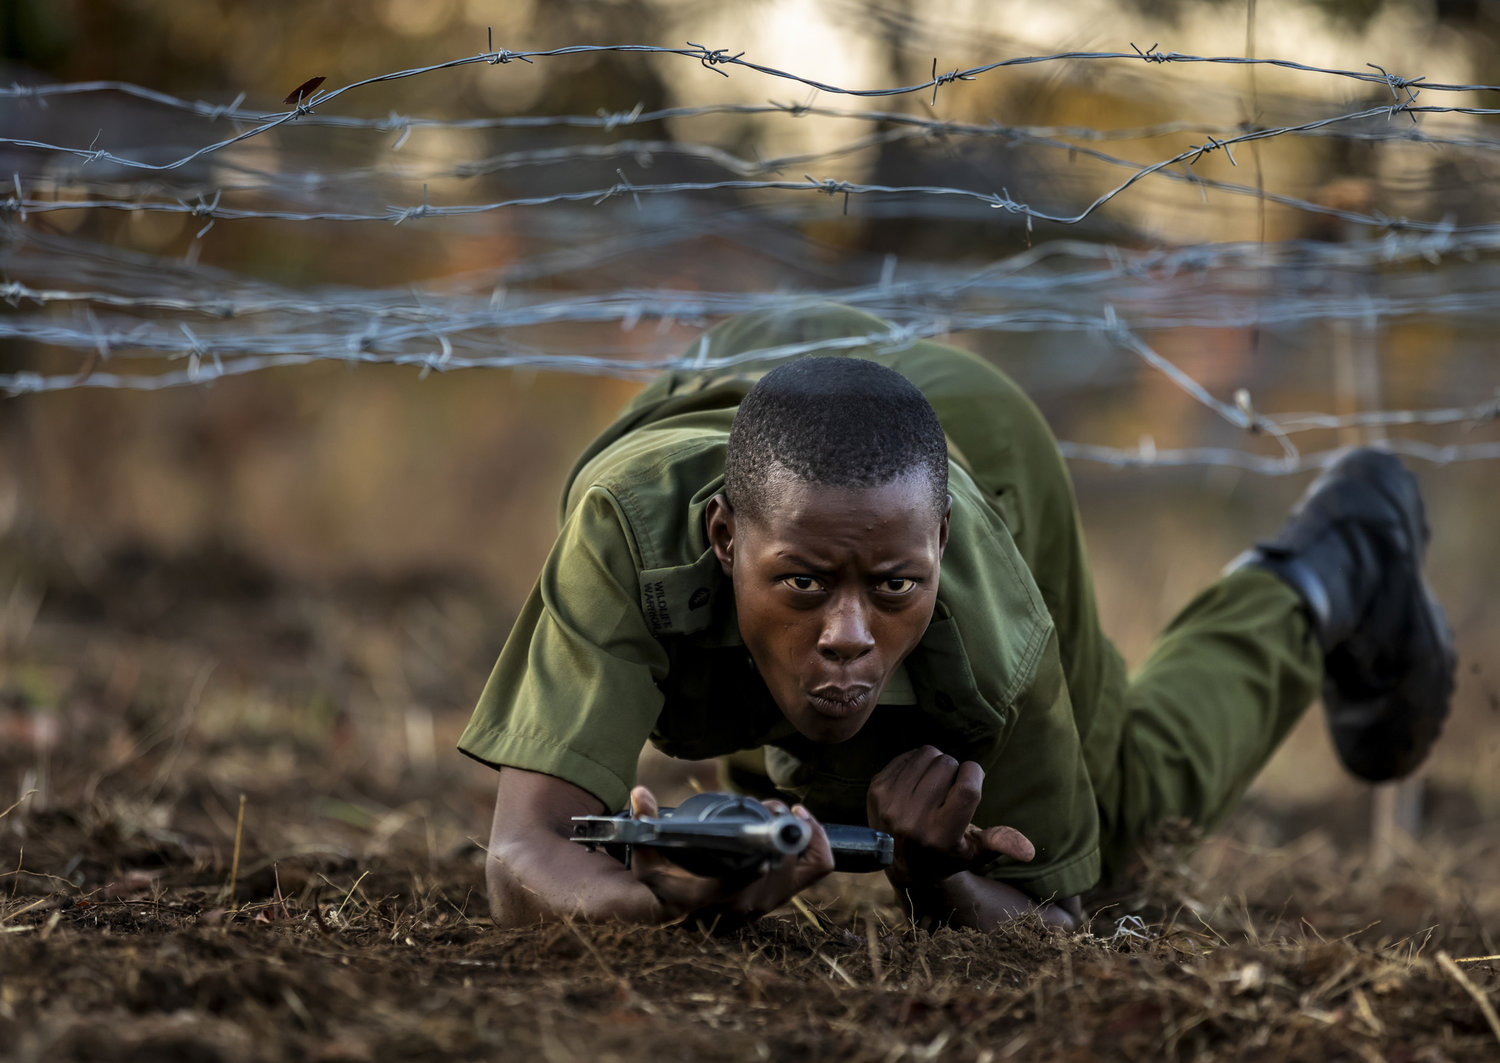  PHUNDUNDU WILDLIFE AREA, ZIMBABWE, JUNE 2018: Members of the all female conservation ranger force known as Akashinga undergo tough training in the bush near their base. Akashinga (meaning the ‘Brave Ones’ in local dialect) is a community-driven conservation model, empowering disadvantaged women to restore and manage a network of wilderness areas as an alternative to trophy hunting. Many current western-conceived solutions to conserve wilderness areas struggle to gain traction across the African continent. Predominately male forces are hampered by ongoing corruption, nepotism, drunkenness, aggressiveness towards local communities and a sense of entitlement. The I.A.P.F, the International Anti-Poaching Foundation led by former Australian Special Forces soldier Damien Mander, was created as a direct action conservation organisation to be used as a surgical instrument in targeting wildlife crime. In 2017 they decided to innovate, using an all- female team to manage an entire nature reserve in Zimbabwe. The program builds an alternative approach to the militarized paradigm of ‘fortress conservation’ which defends colonial boundaries between nature and humans. While still trained to deal with any situation they may face, the team has a community-driven interpersonal focus, working with rather than against the local population for the long-term benefits of their own communities and nature. Cut off from places of worship and burial, grazing areas, access to water, food, traditional medicine and given limited opportunity for employment or tourism benefits, it’s little wonder many of these communities struggle to see any value in conservation efforts. 
Women have traditionally played major roles in battle and are now re-emerging as key solutions in law enforcement and conflict resolution. In the Middle-East, counterinsurgency operations that involve penetrating and working with the local population to try and win the hearts and minds have become fundamentally relian 